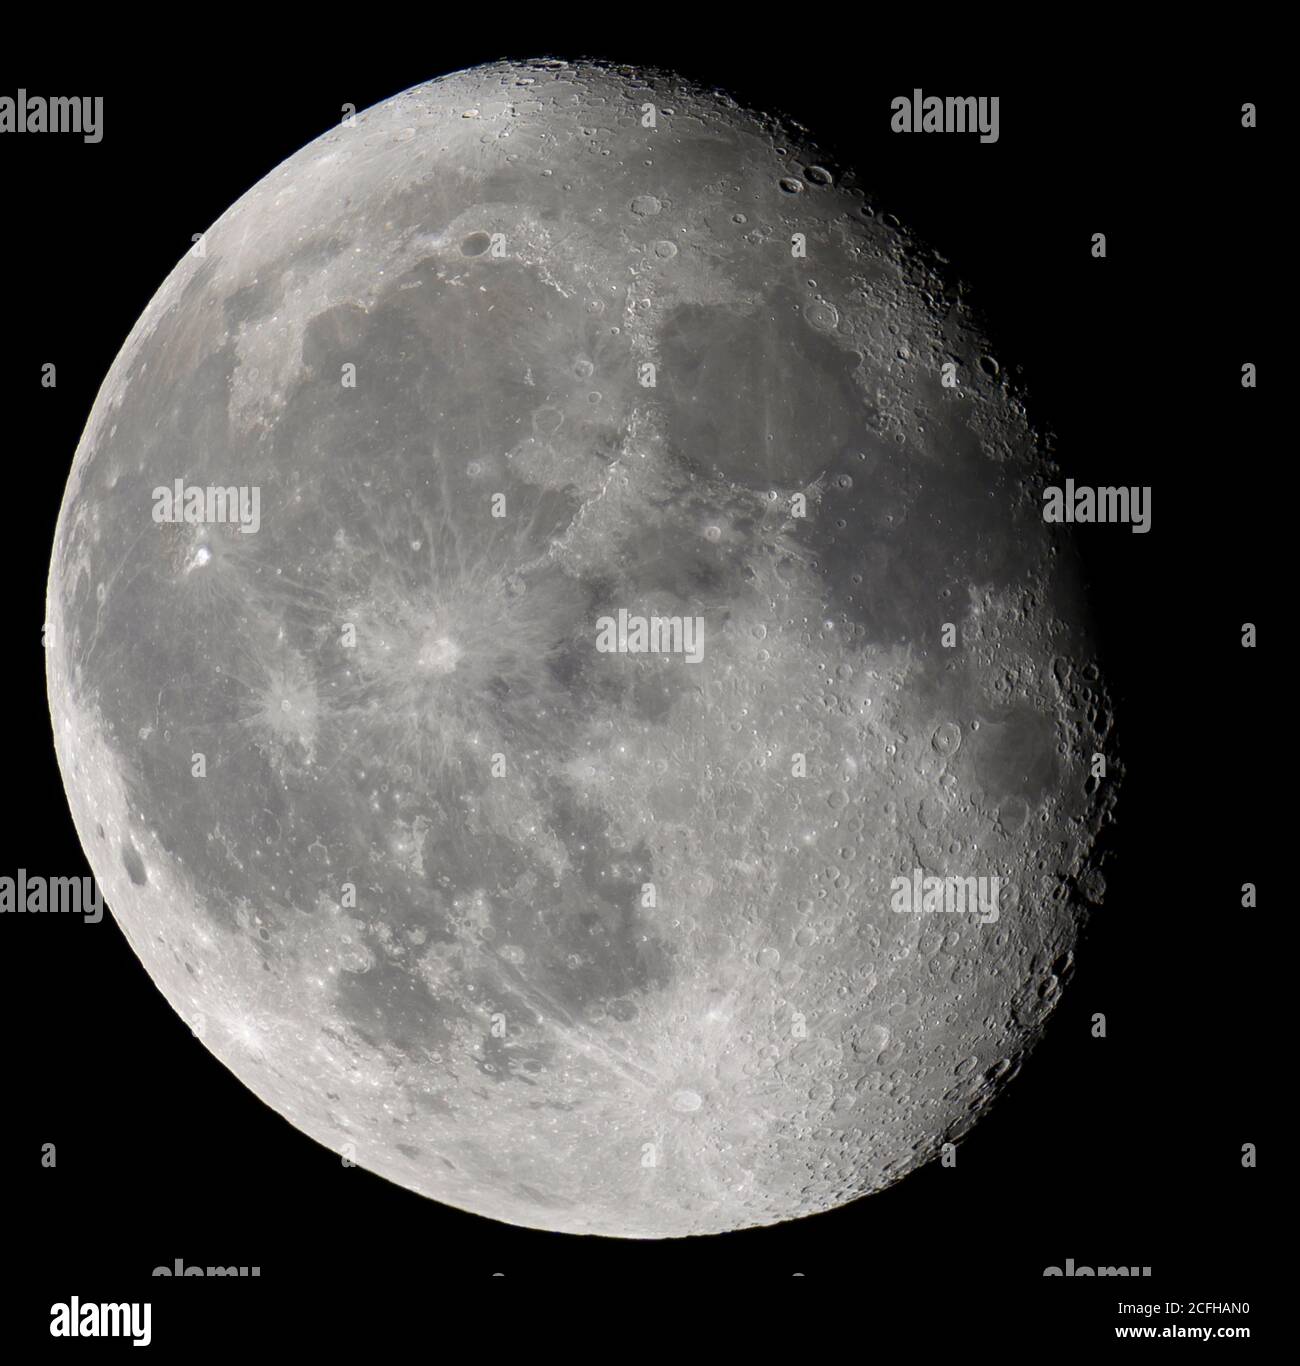 London, UK. 6 September 2020. The Waning Gibbous Corn Moon appears 90% illuminated tonight in clear sky over London. Credit: Malcolm Park/Alamy Live News Stock Photo